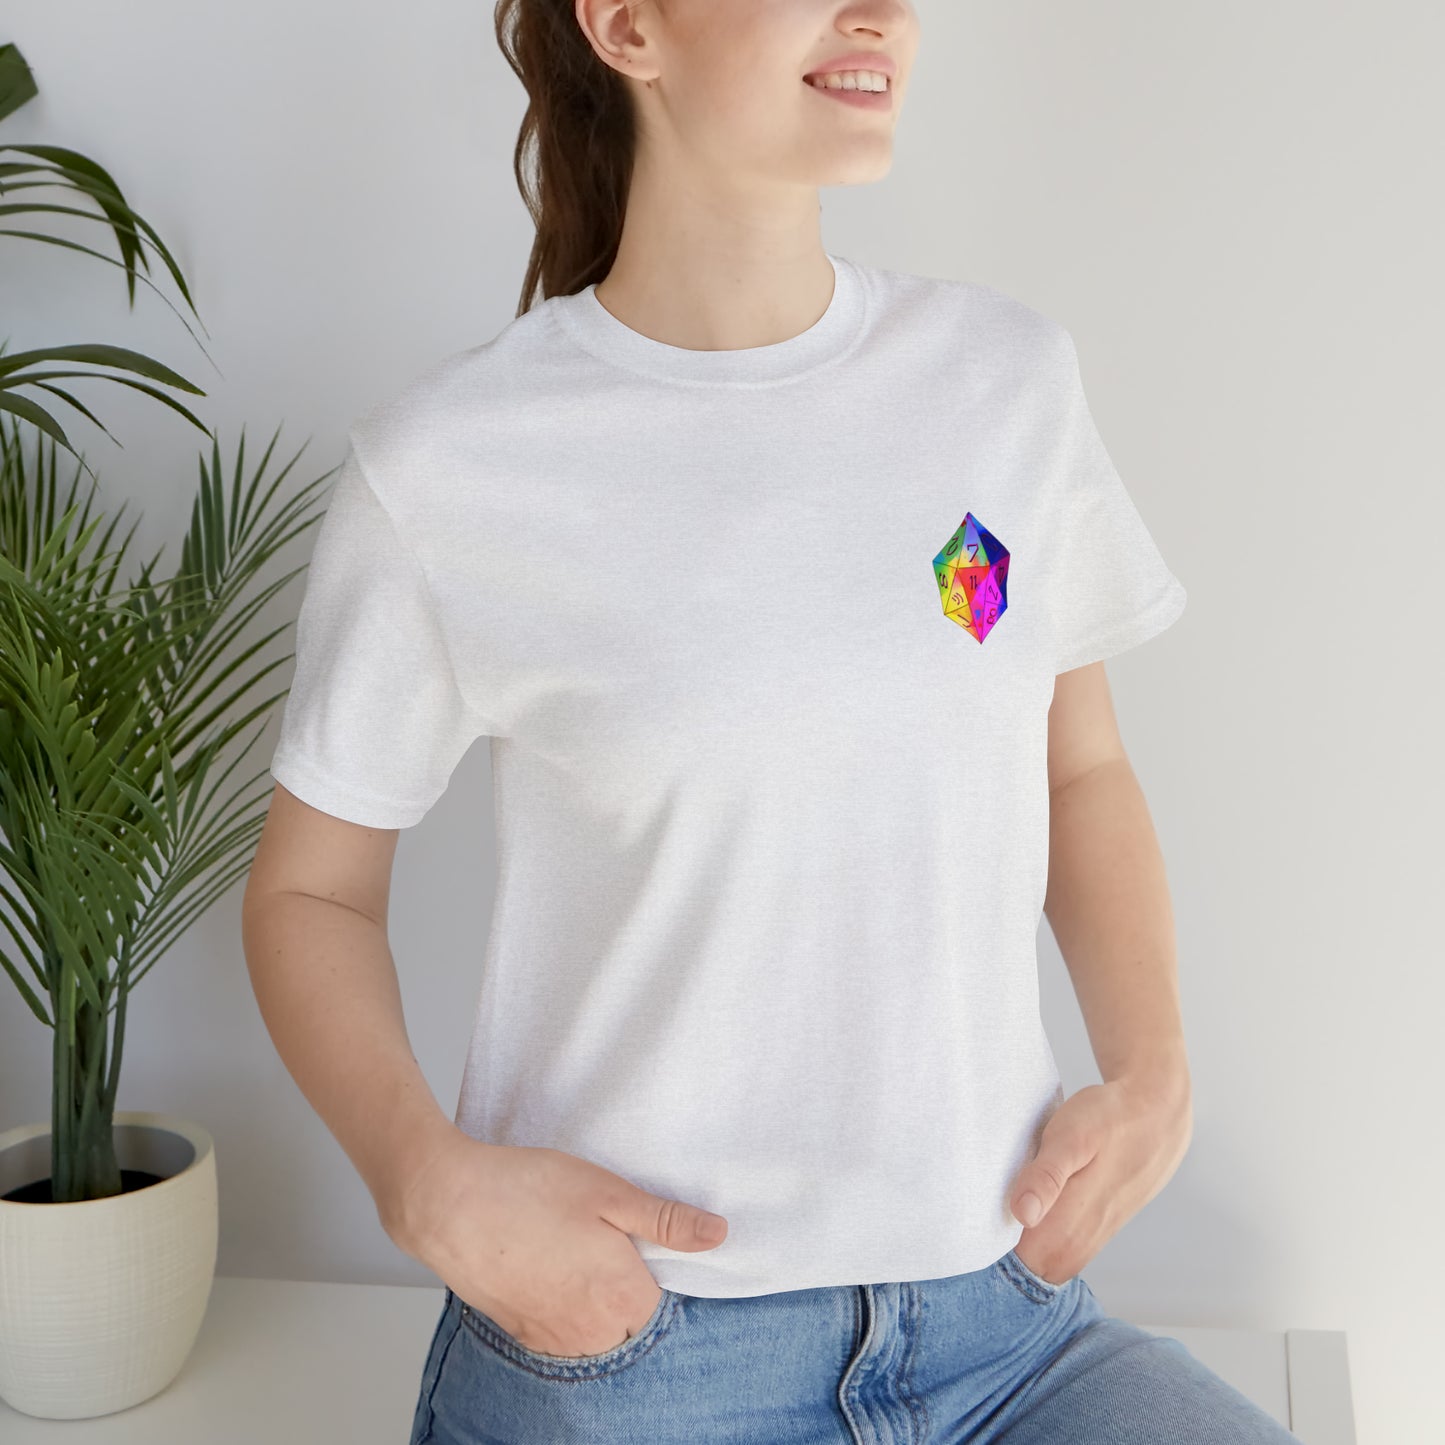 ash-quest-thread-tee-shirt-with-small-rainbow-dice-on-left-chest